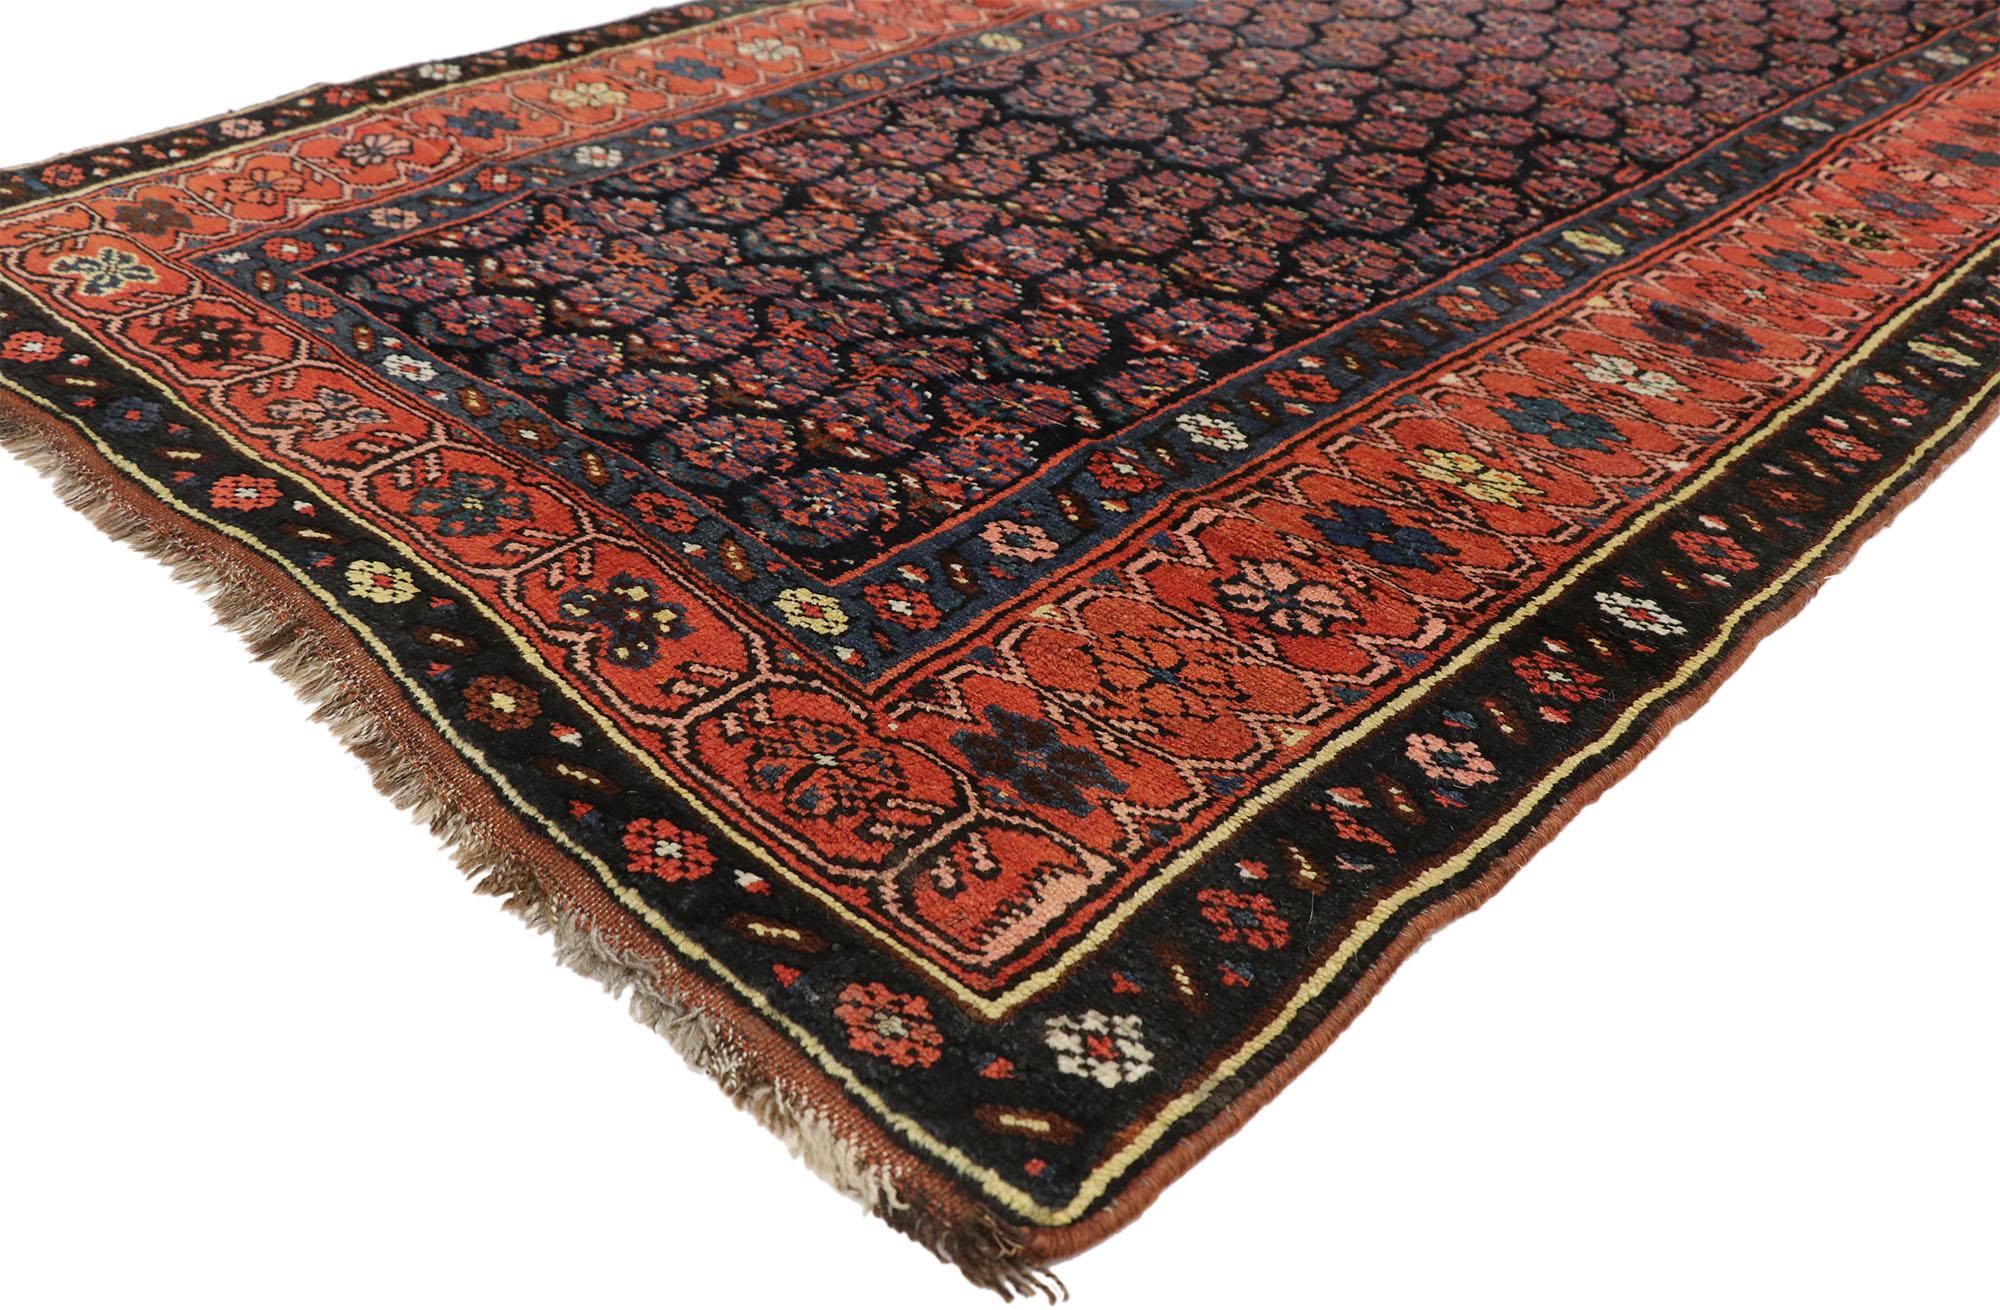 76603, antique Persian Kurdish runner with Boteh design, hallway runner. This hand-knotted wool antique Persian Kurdish runner features an all-over geometric repetition of the Boteh design on an ink blue background. The Boteh resembles sprouting